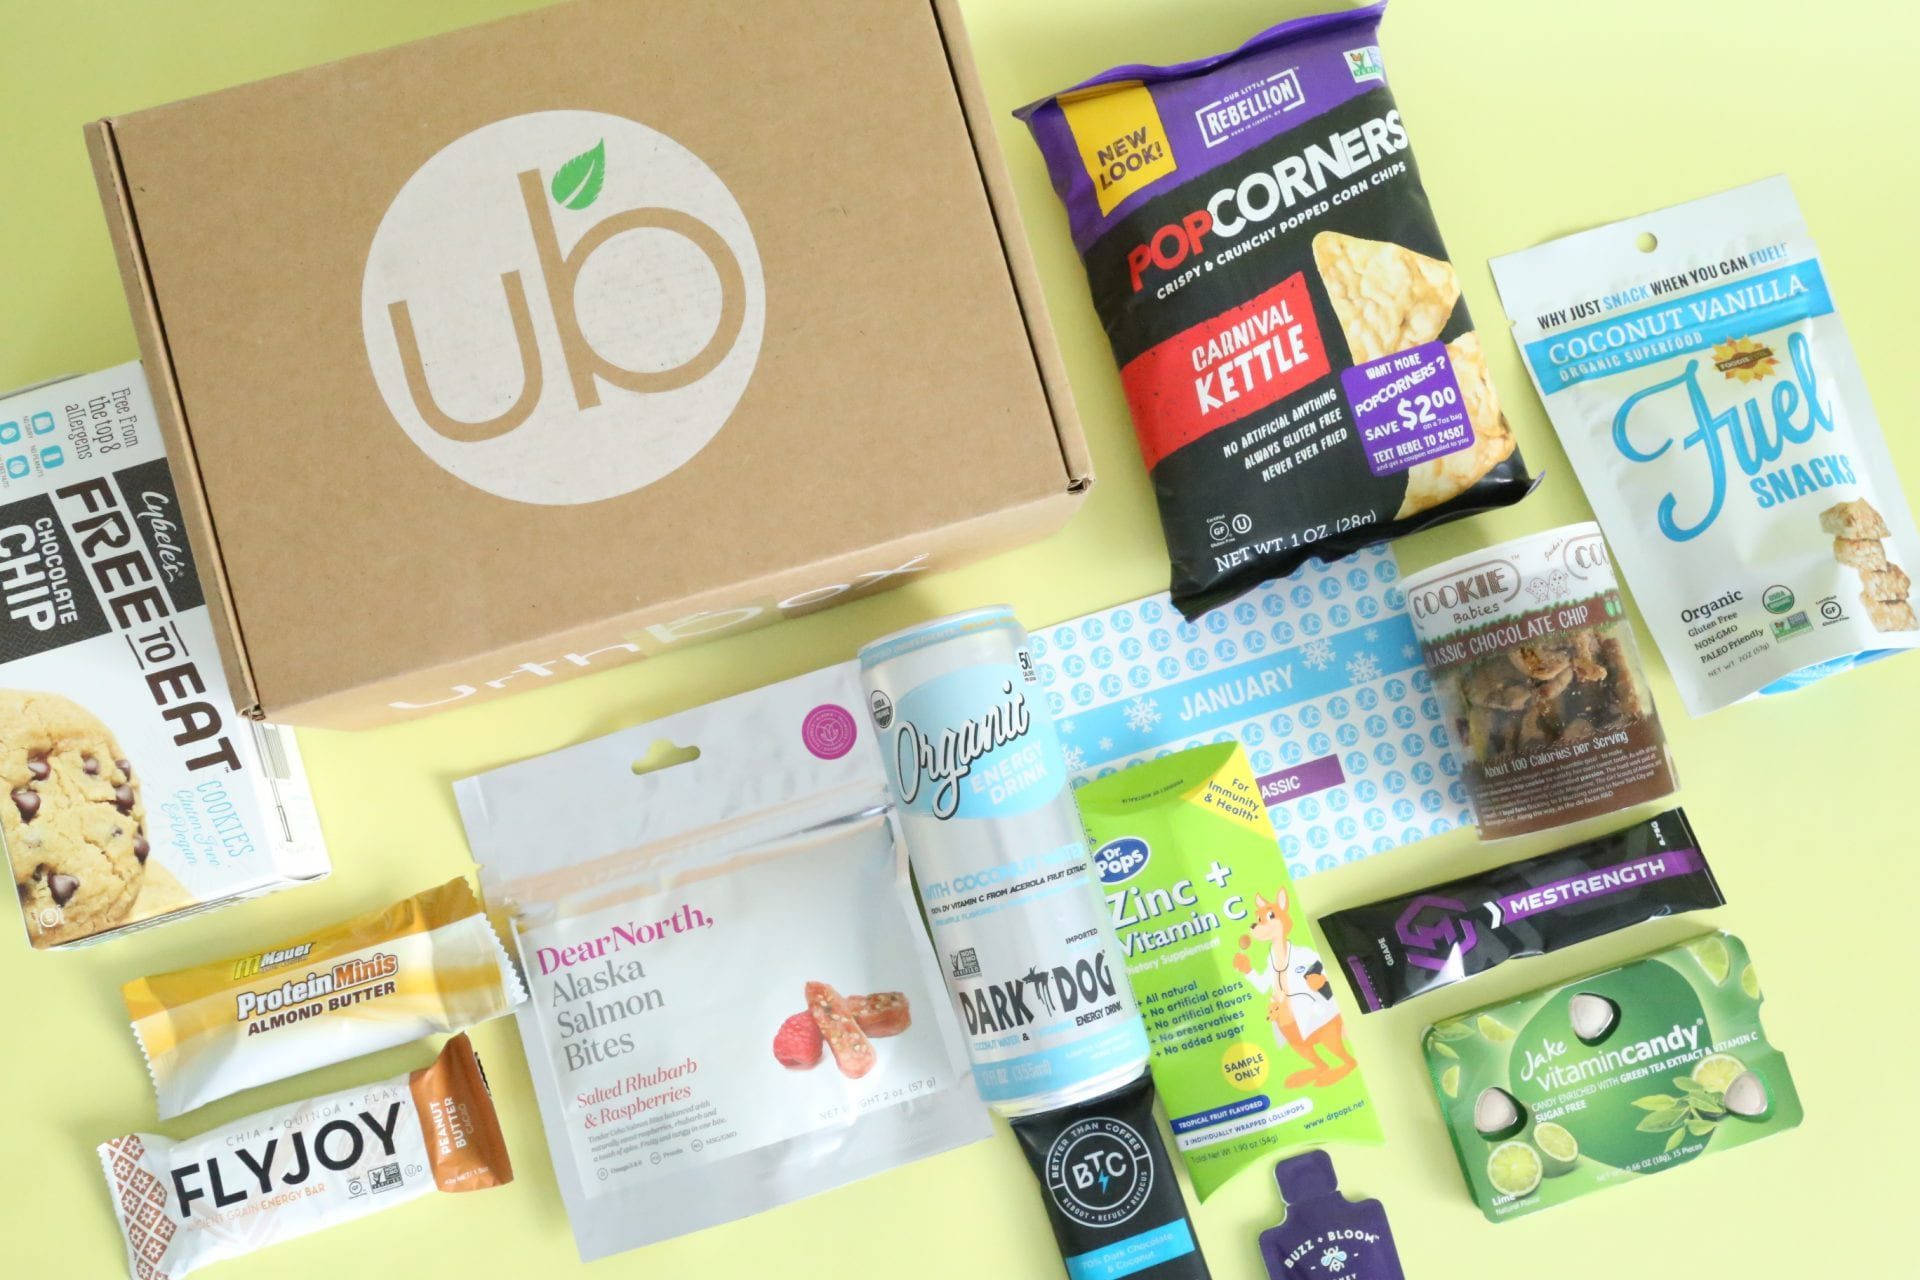 Urthbox Spring Promo: Save 10% OFF + Get a FREE Box